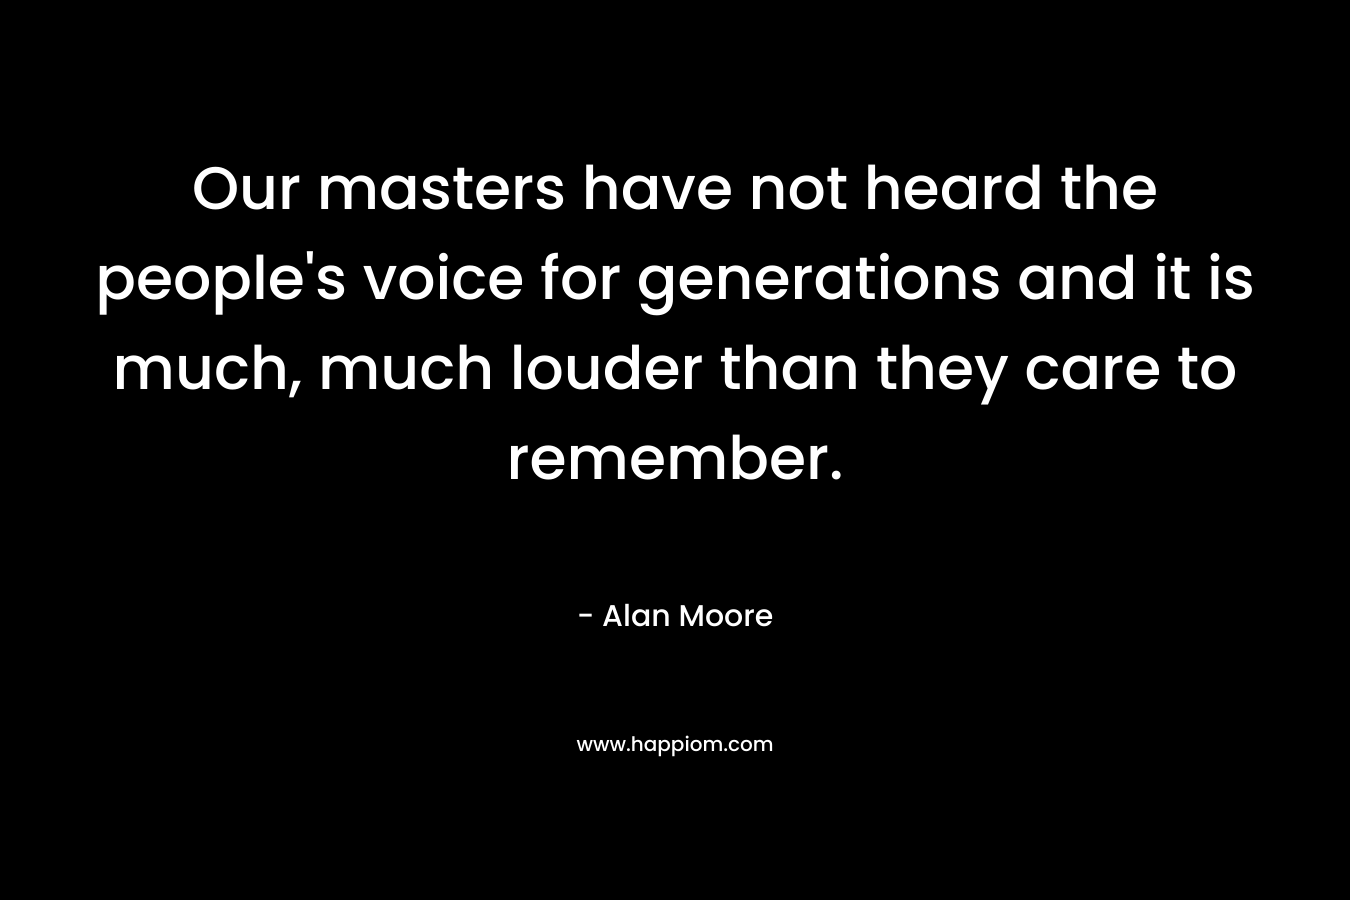 Our masters have not heard the people's voice for generations and it is much, much louder than they care to remember.